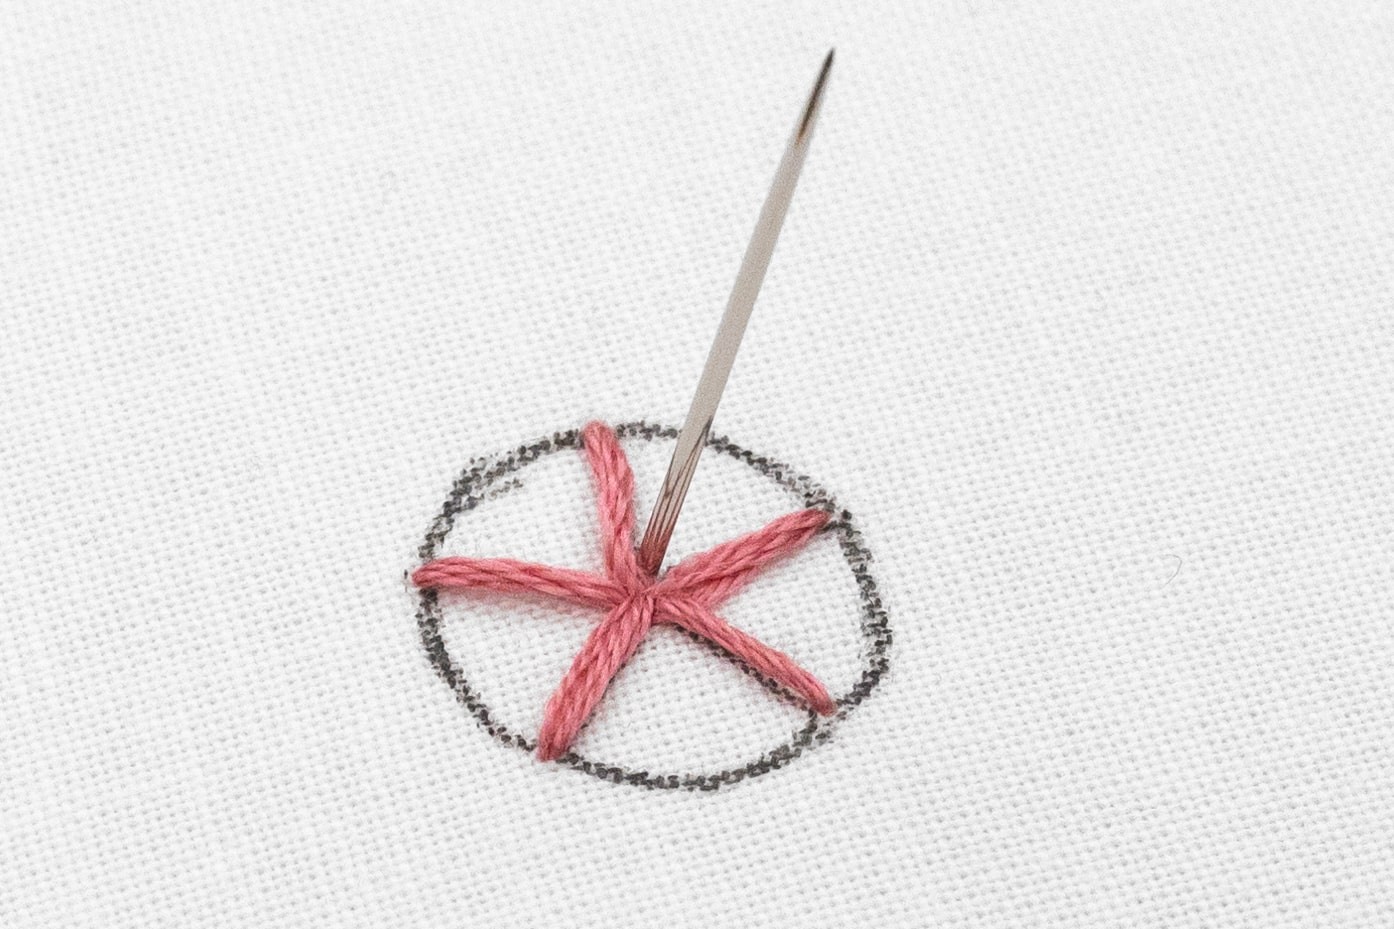 A needle is brought up in the spoke of the woven rose.